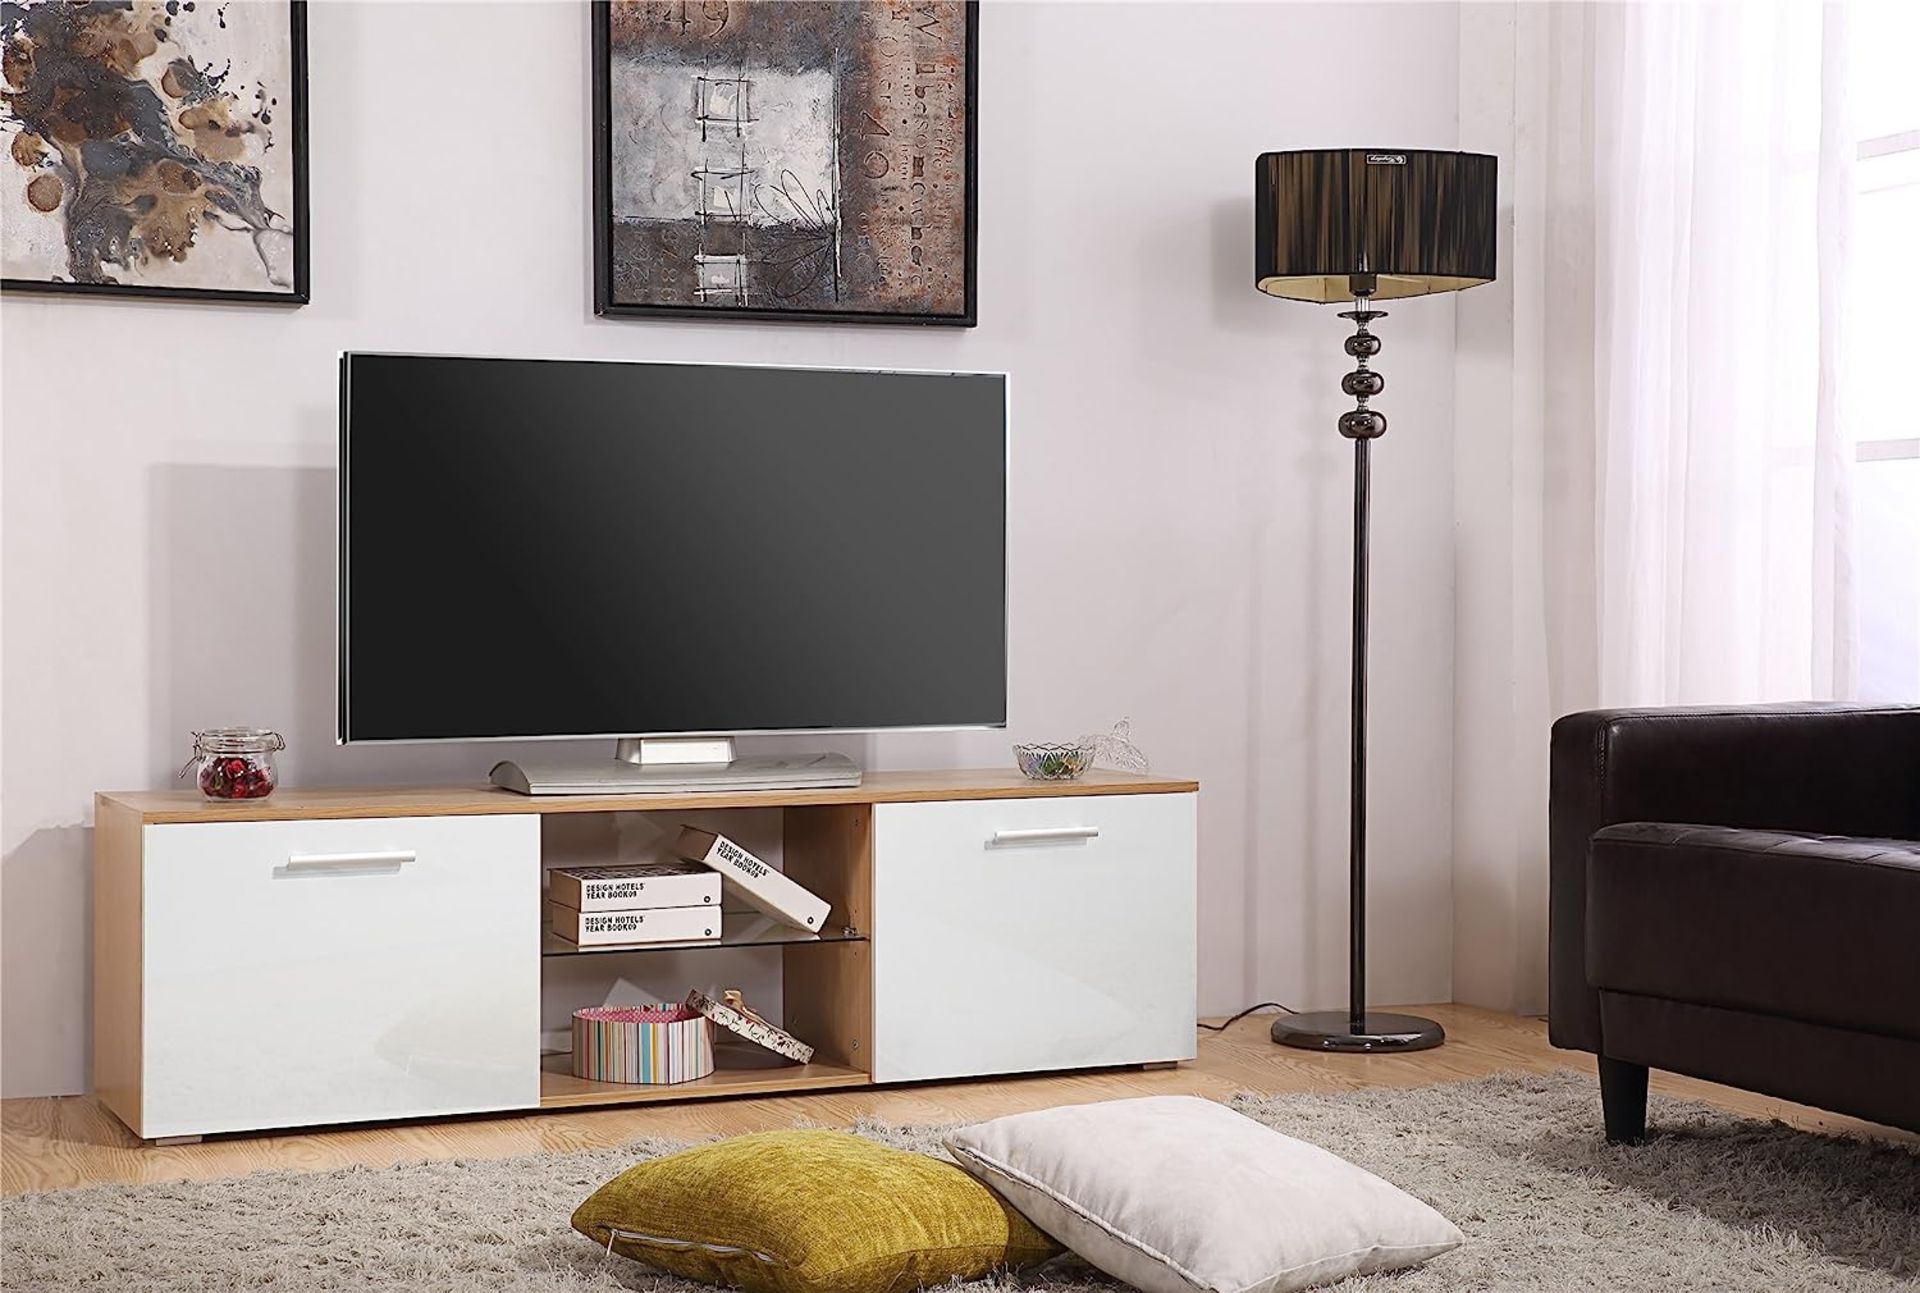 10 X BRAND NEW HARMIN MODERN 160CM TV STAND CABINET UNIT WITH HIGH GLOSS DOORS (WHITE ON OAK) - Image 2 of 9